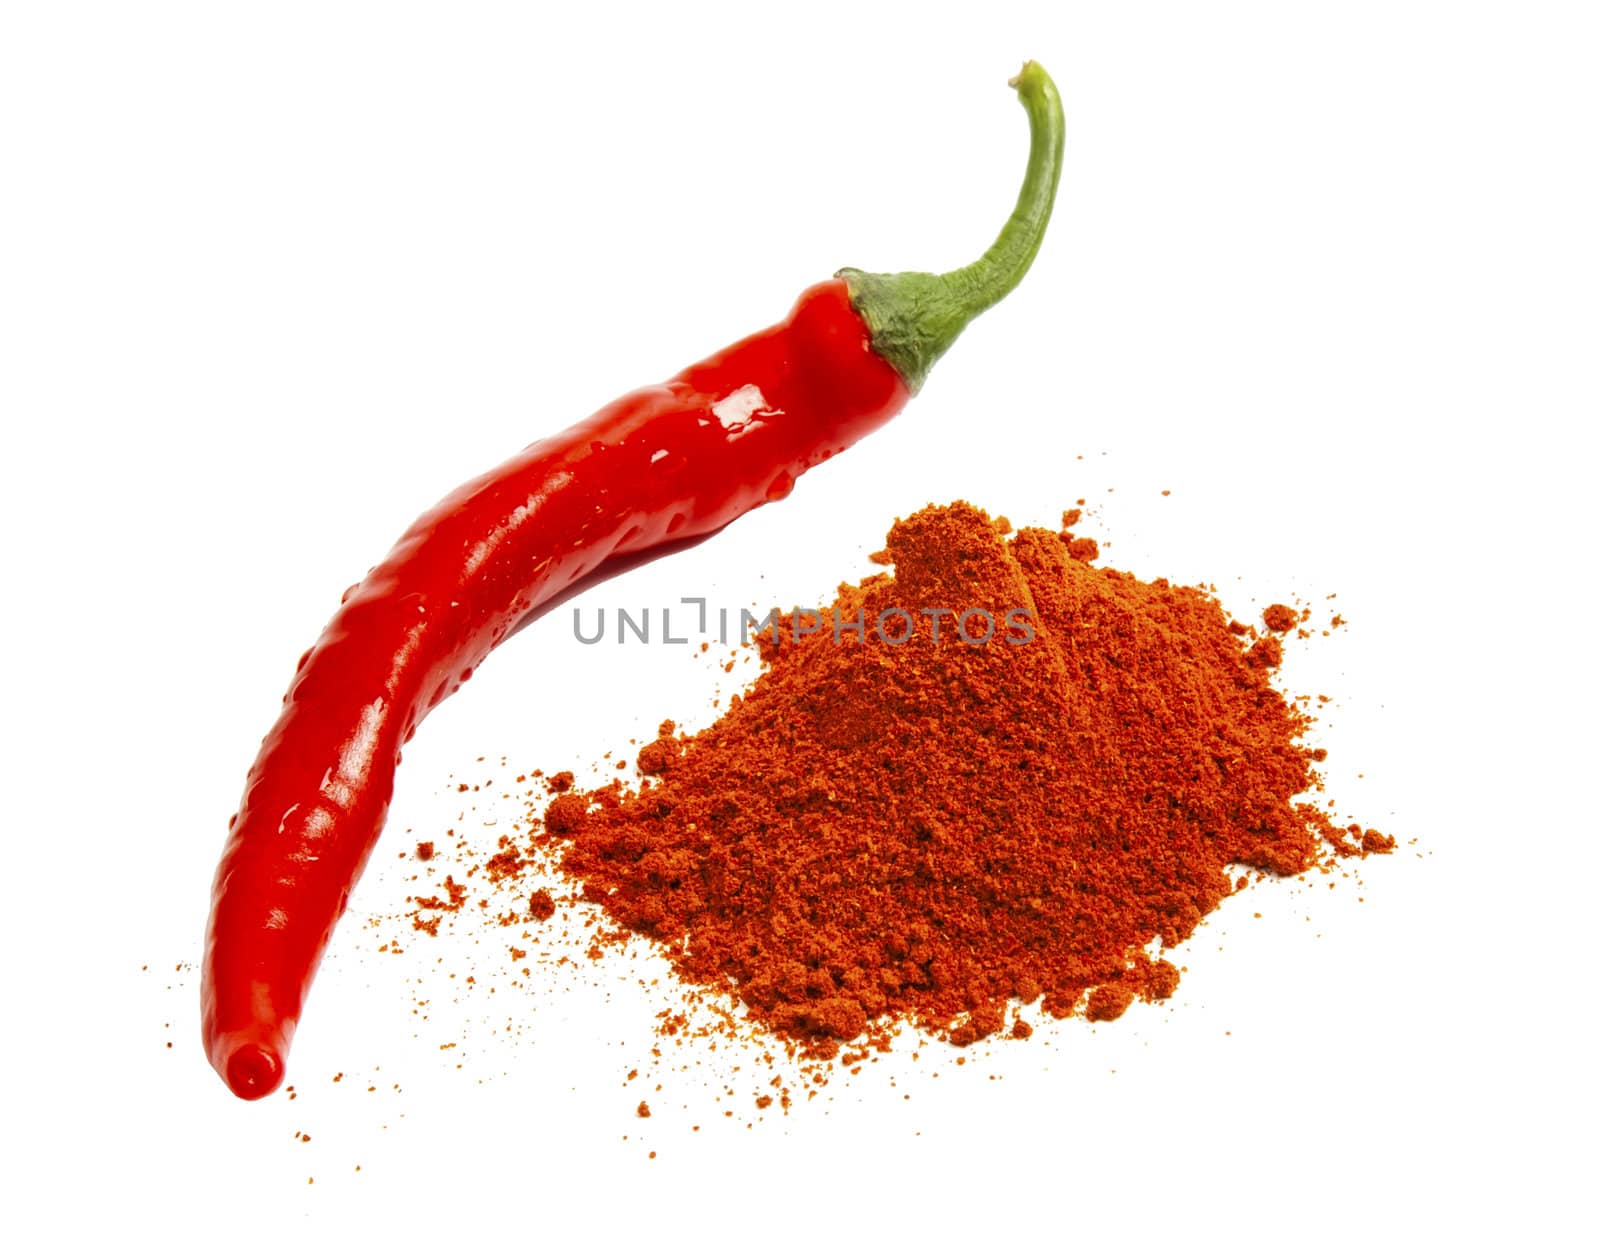 Red chili pepper and red pepper spice by RawGroup